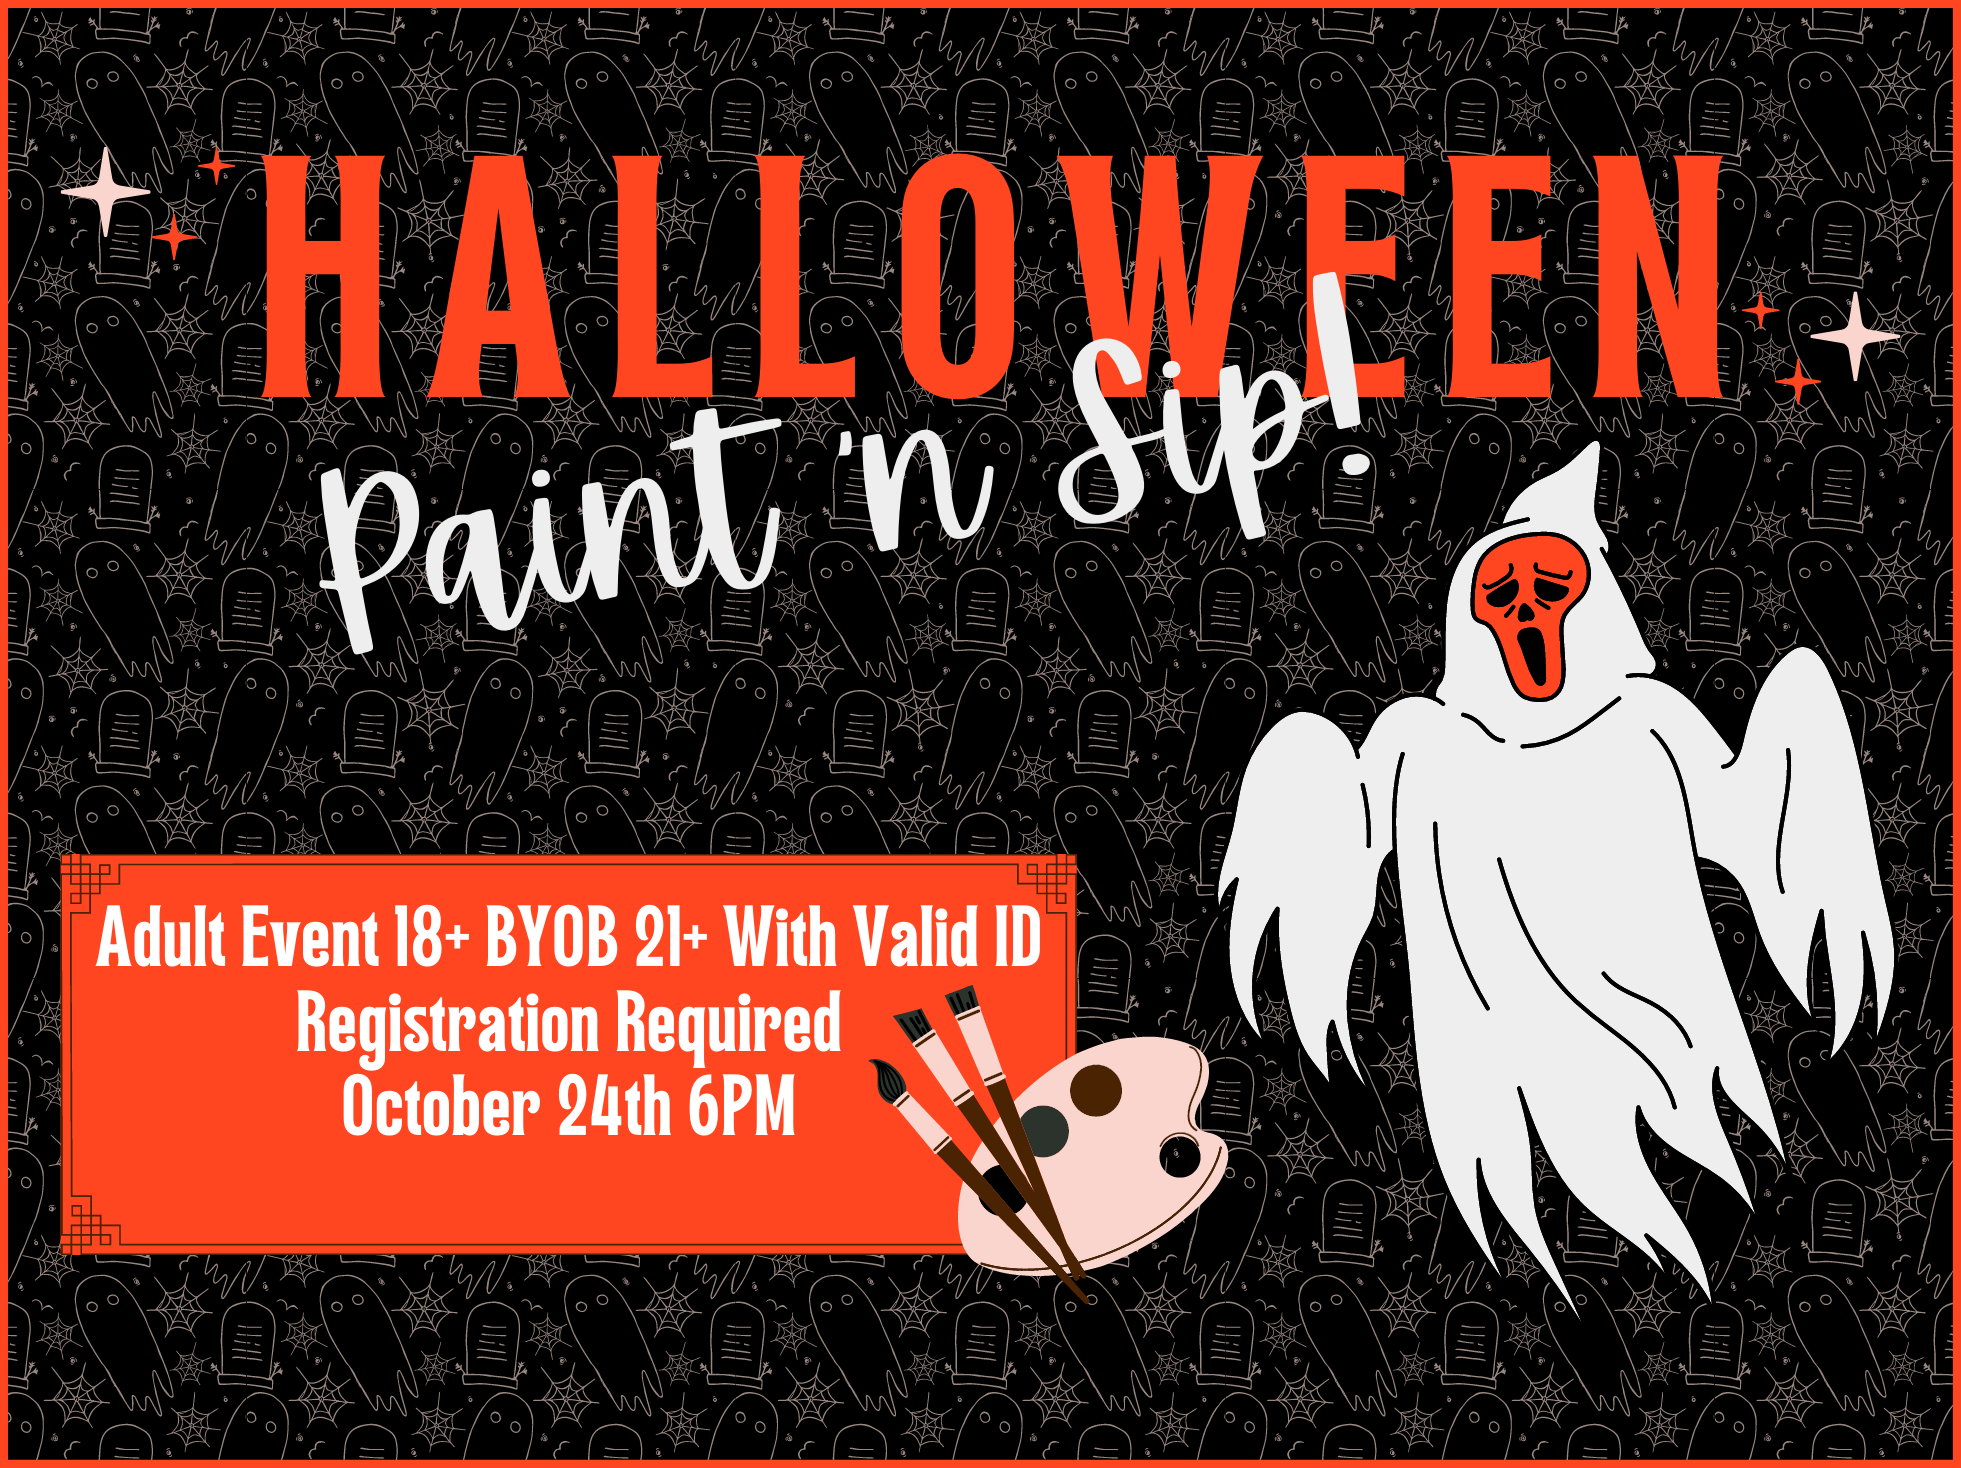 Halloween Paint and Sip, Registration Required. October 24th at 6PM